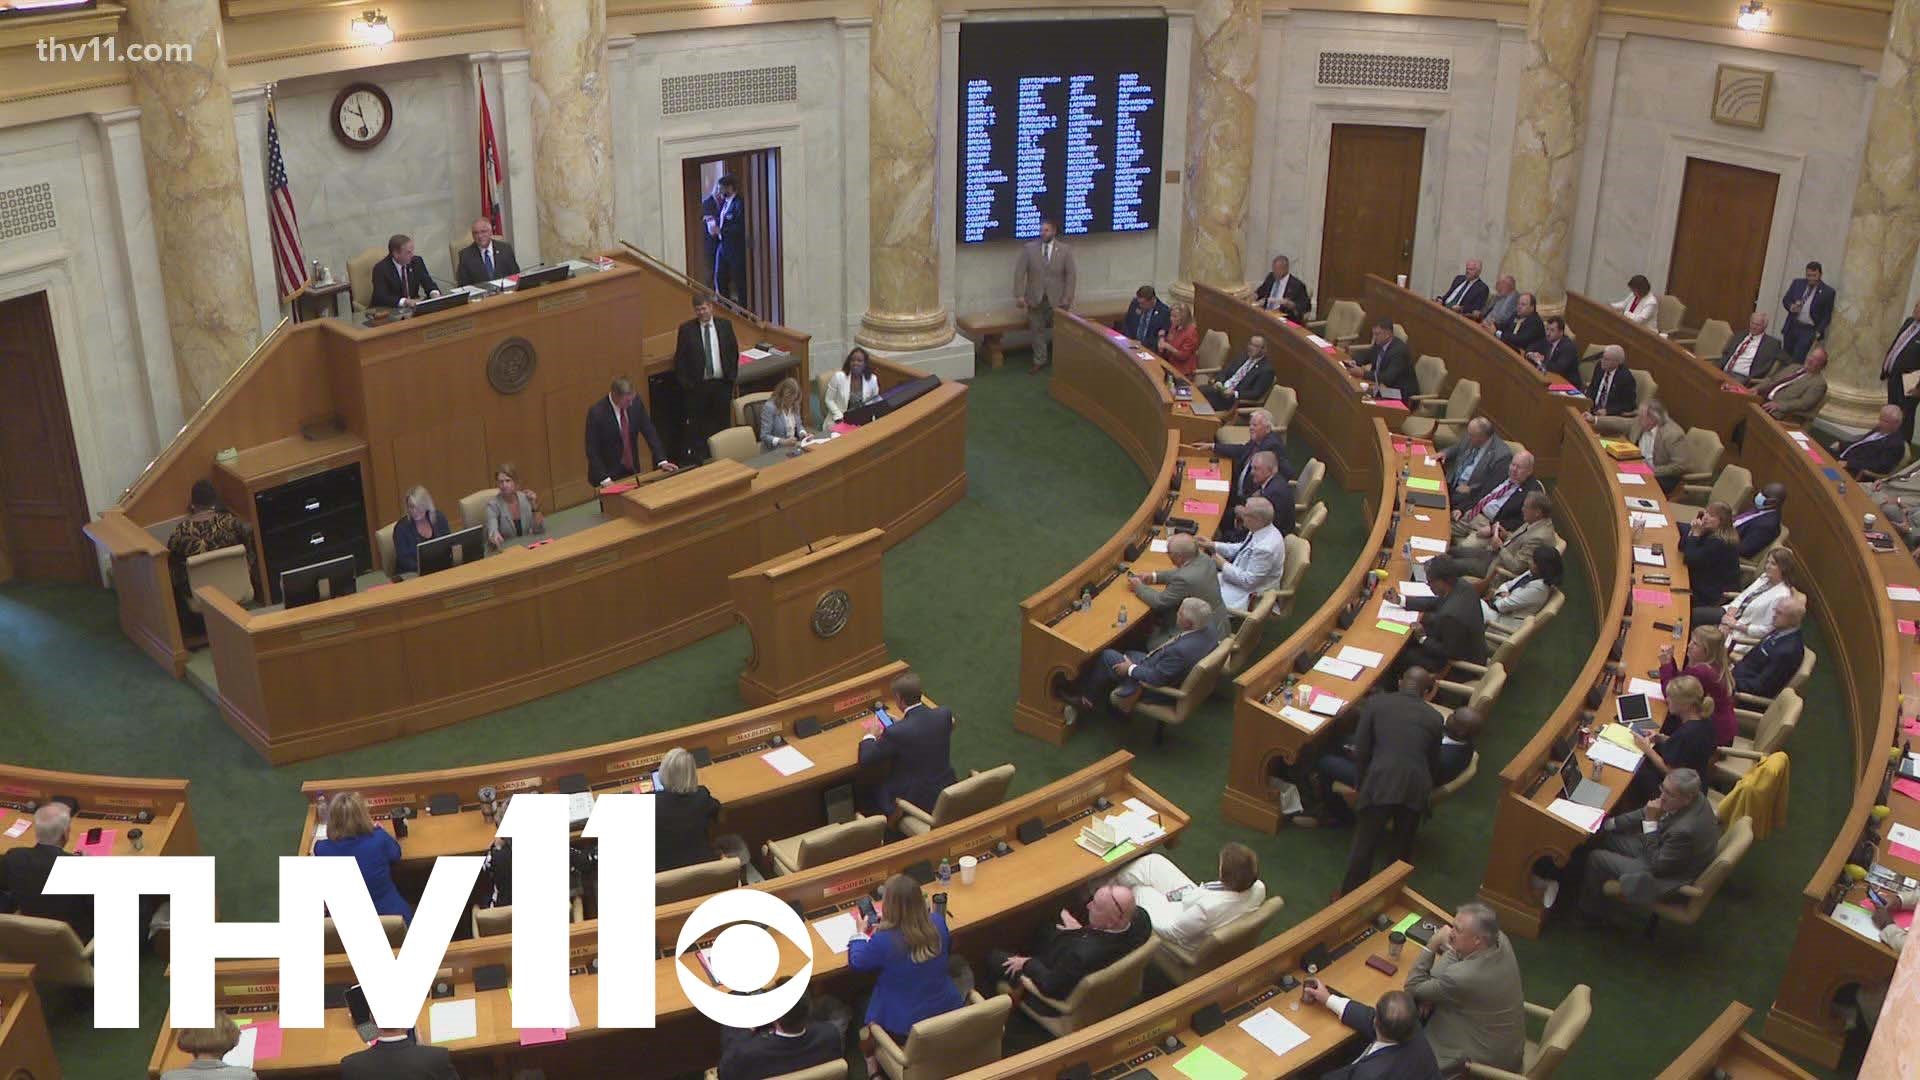 Lawmakers are making progress during the second day of Arkansas's special session— this morning the House and Senate approved bills on tax cuts and school safety.